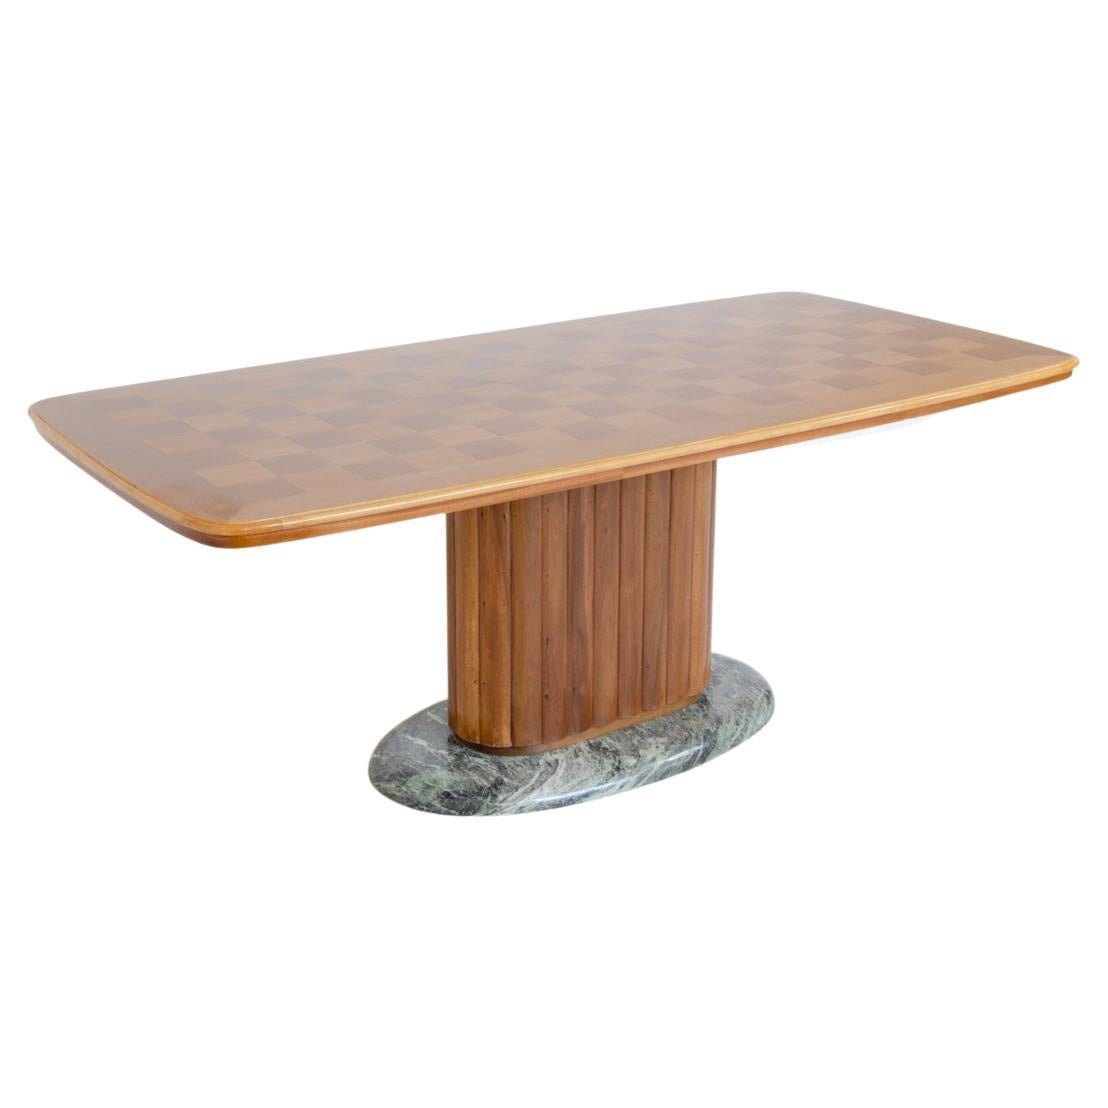 Vittorio Dassi 1940s Dining Table with a Very Nice Mahogany Oval Column Base